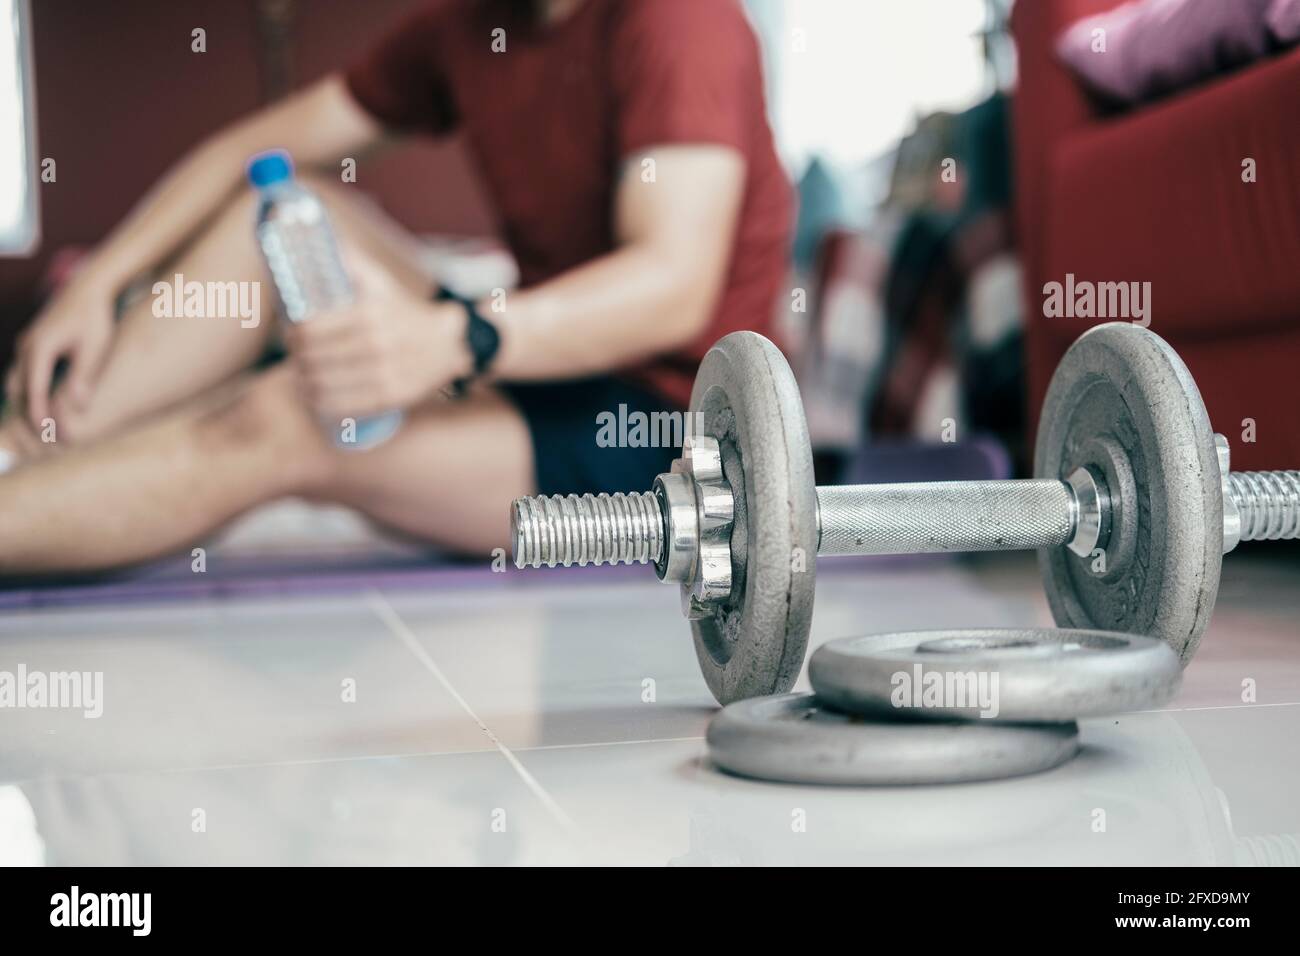 Home fitness, healthy lifestyle concept. Stock Photo